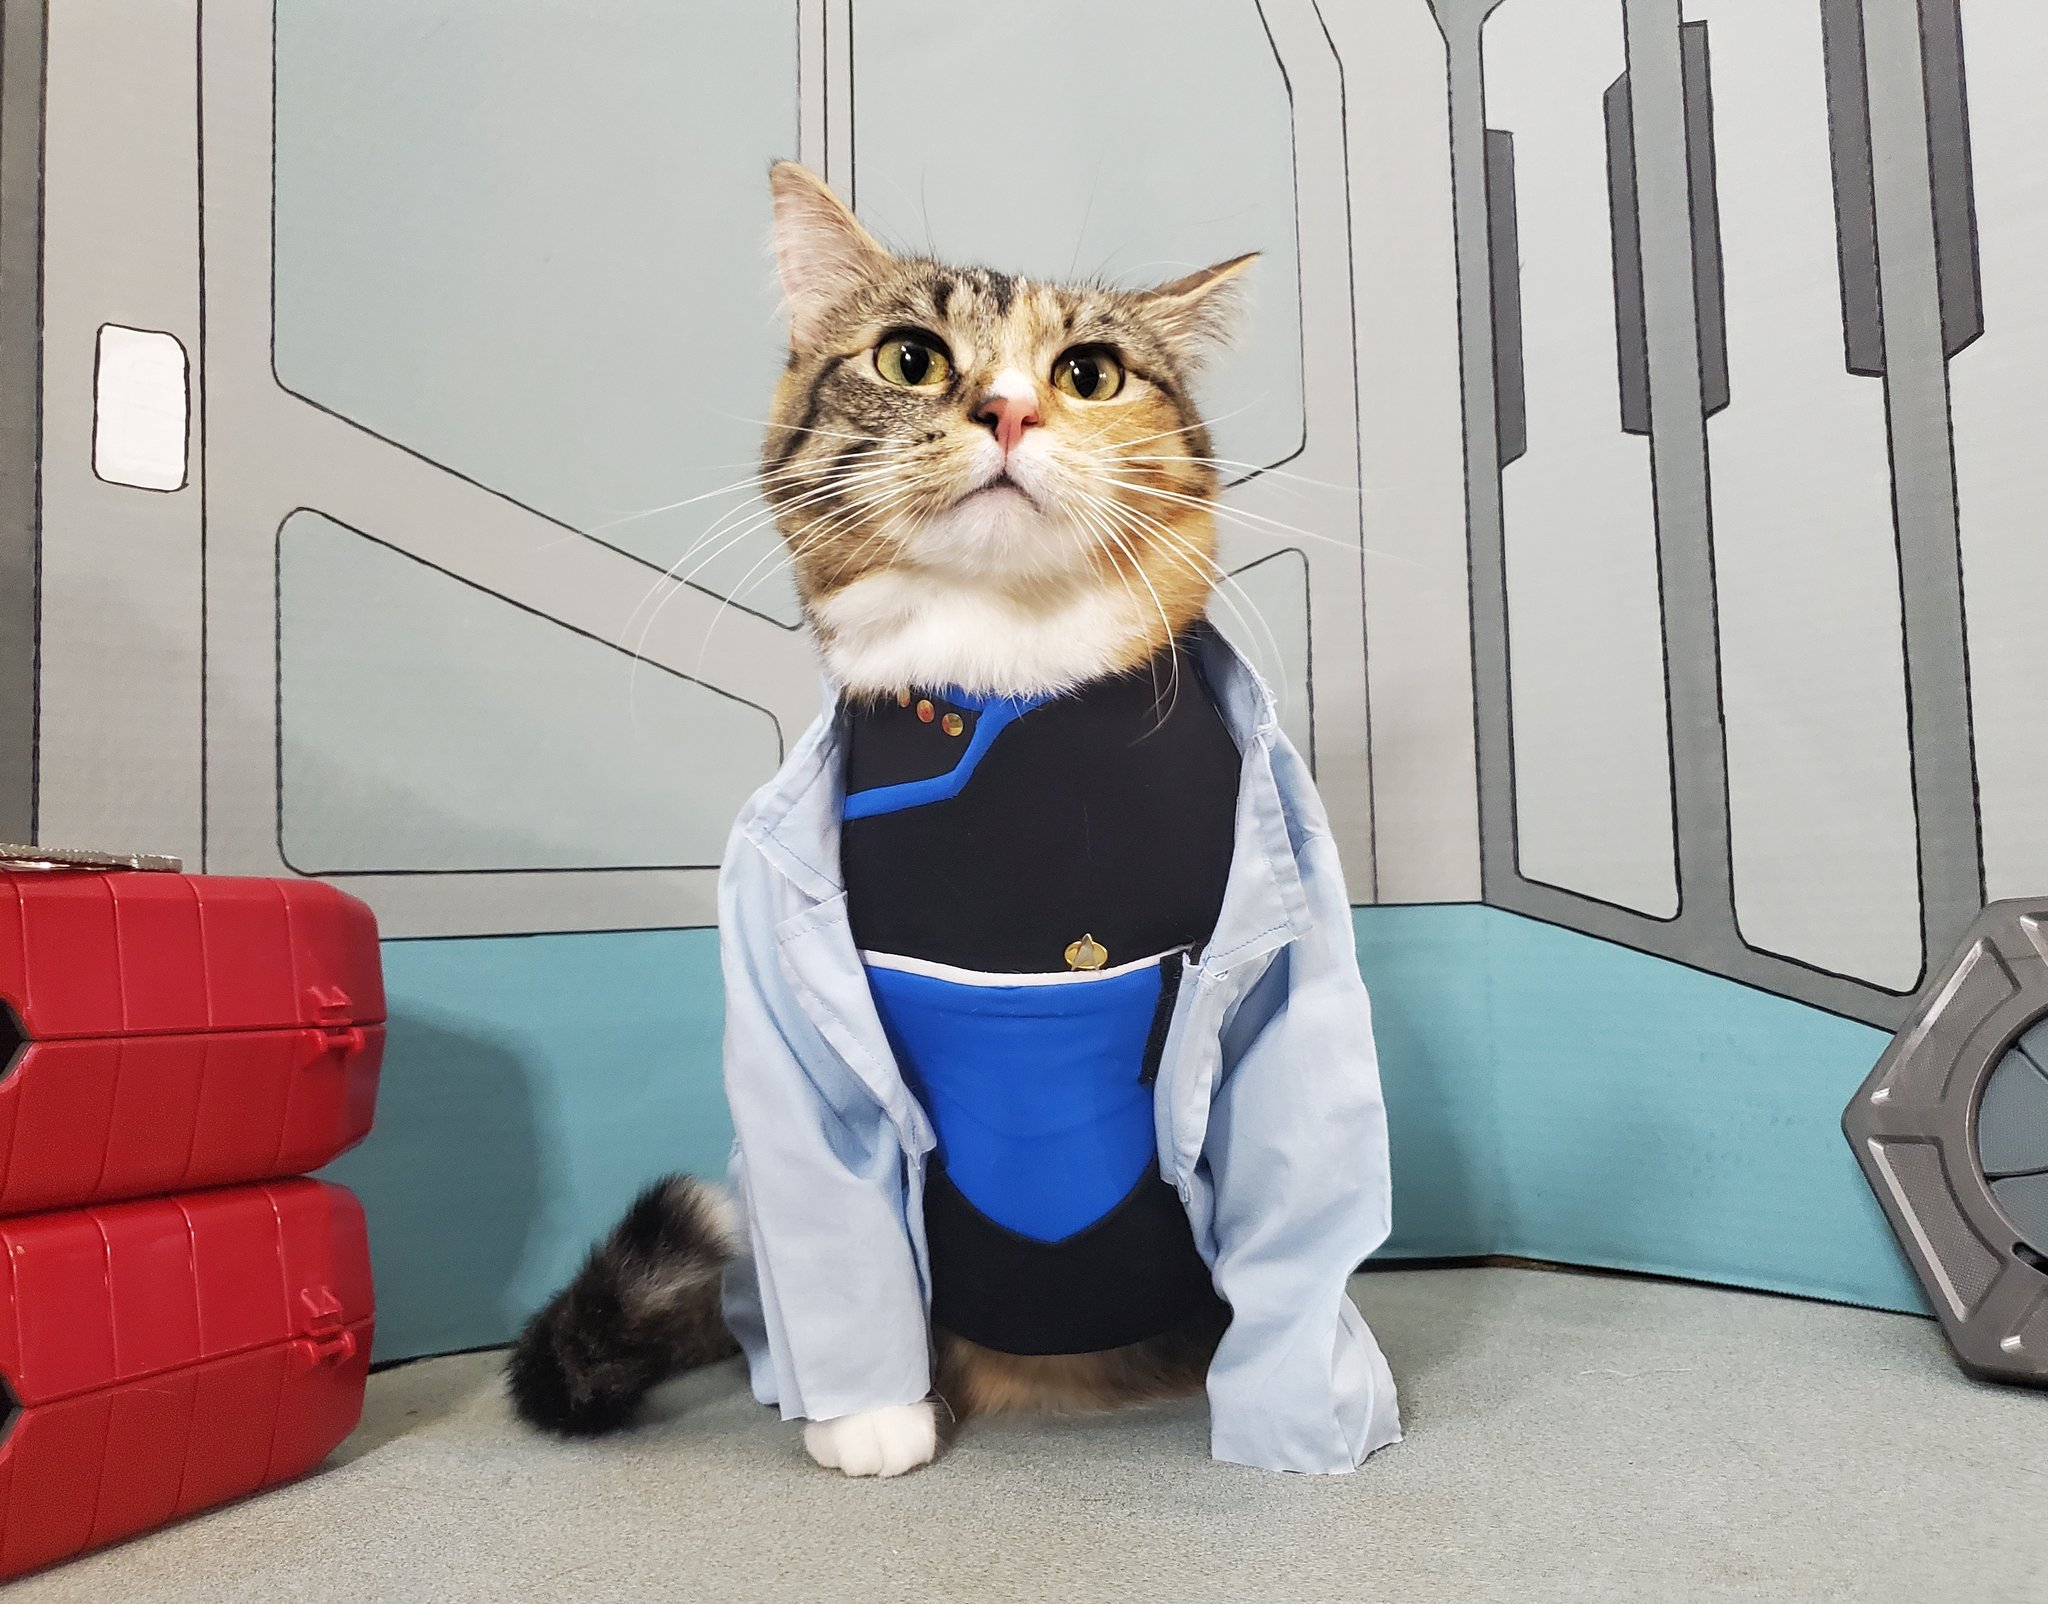 Your Vaxxed Manga Uncle EddieDexter on Twitter: "@Cat_Cosplay Cuteness...